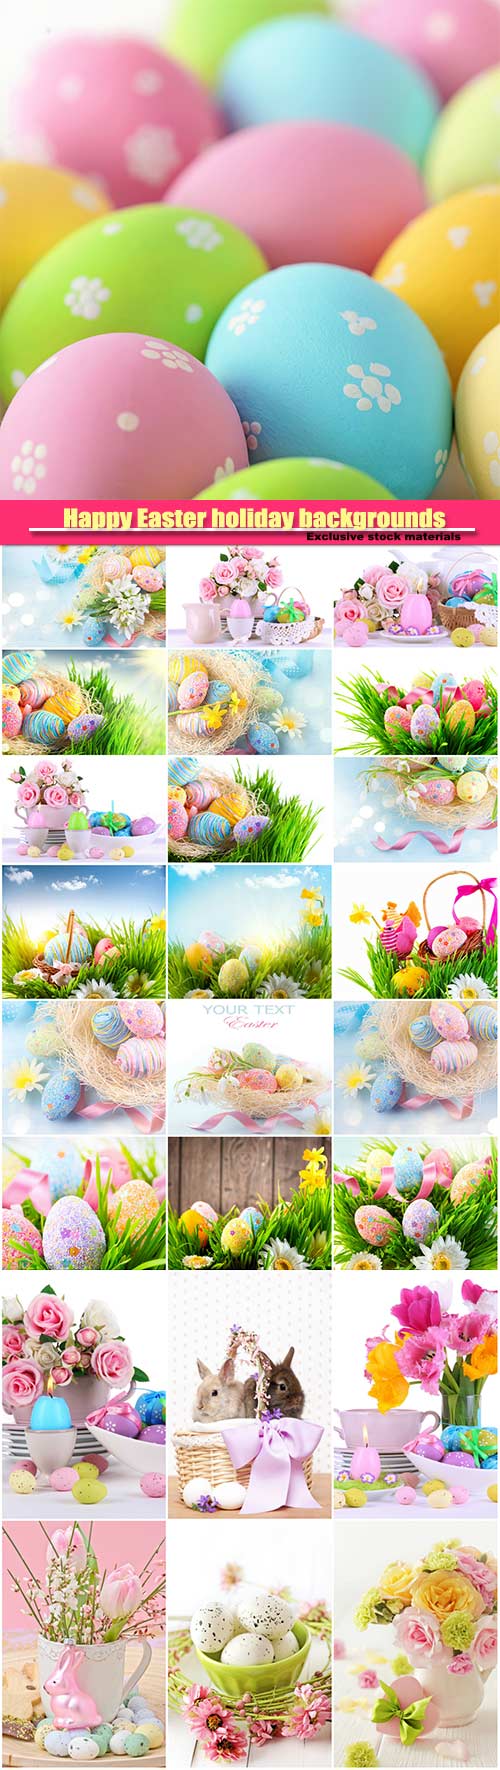 Happy Easter holiday backgrounds, Easter eggs